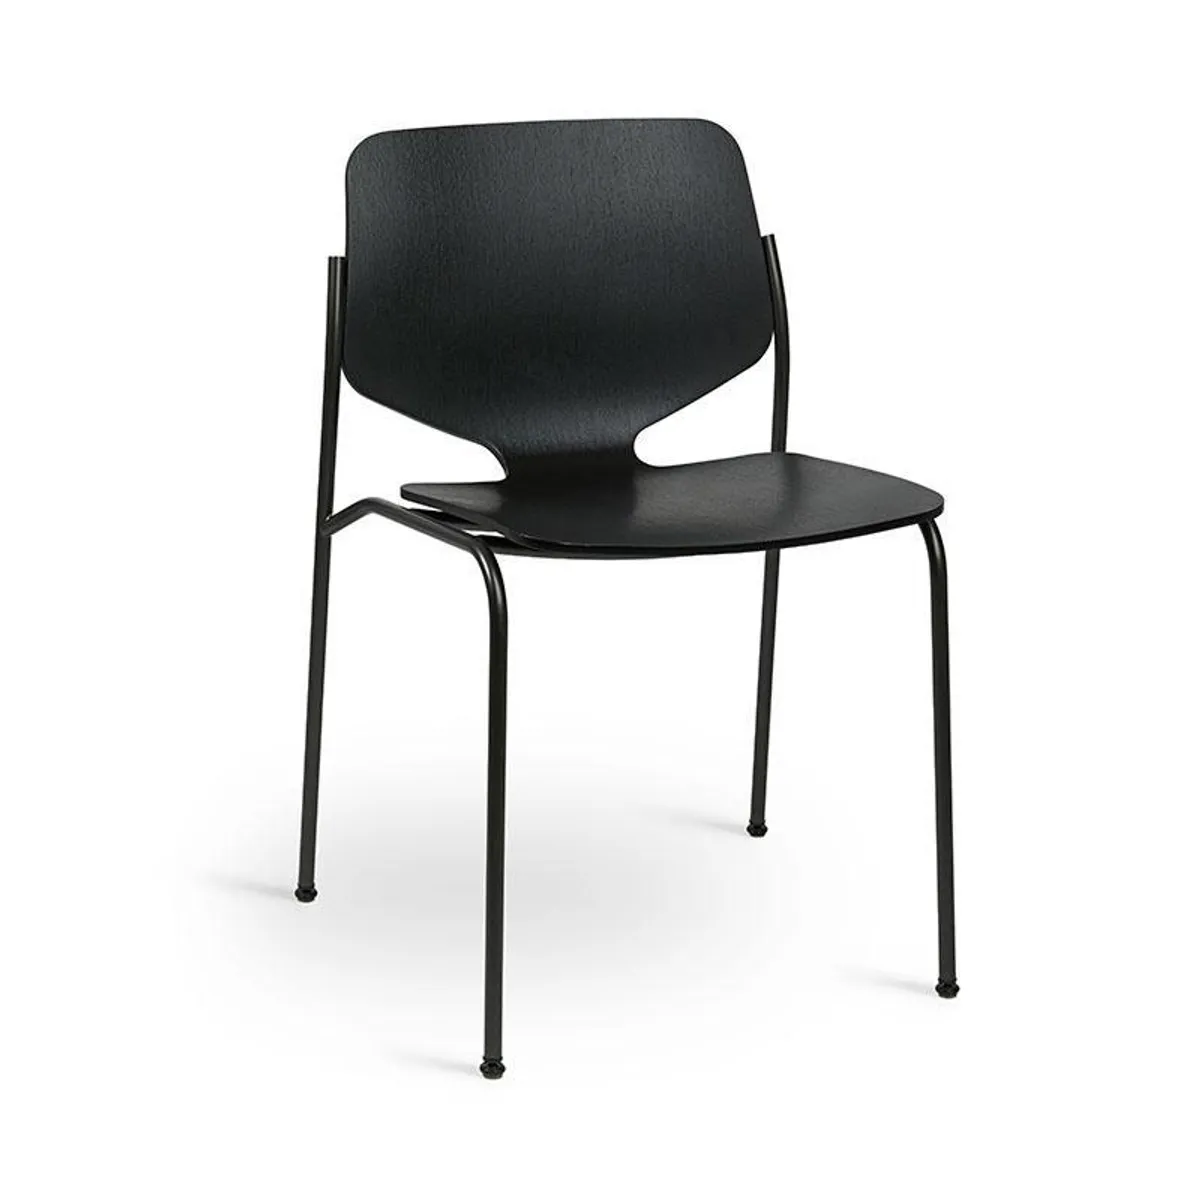 Nova Chair Recycled Furniture Cafe Dining Chair In Black Inside Out Contracts